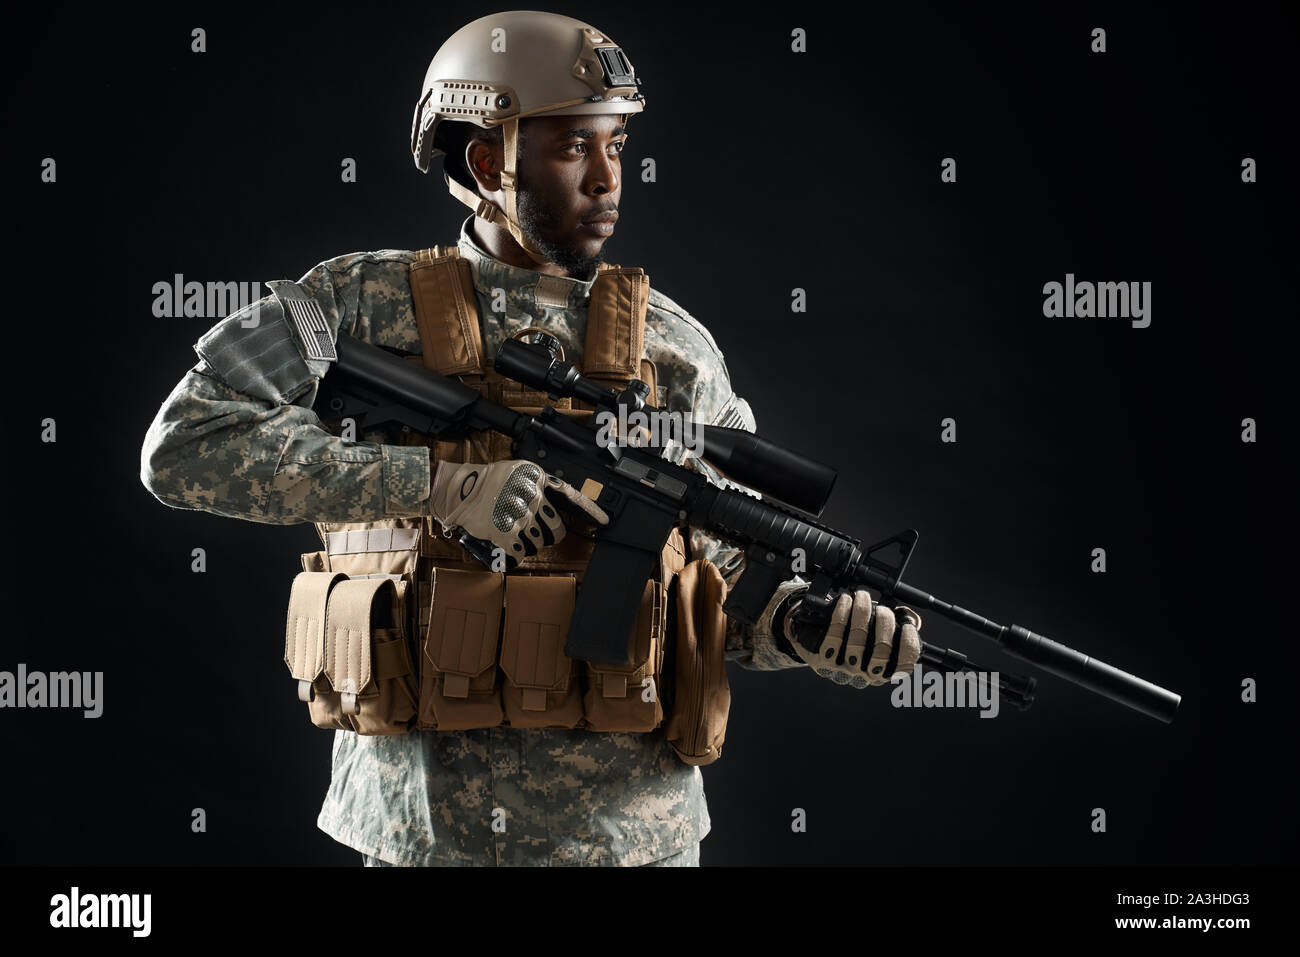 Confident young soldier wearing Americans army uniform and glasses holding weapon machine in hands and keeping position. African man preparing for war, protecting homeland. Stock Photo